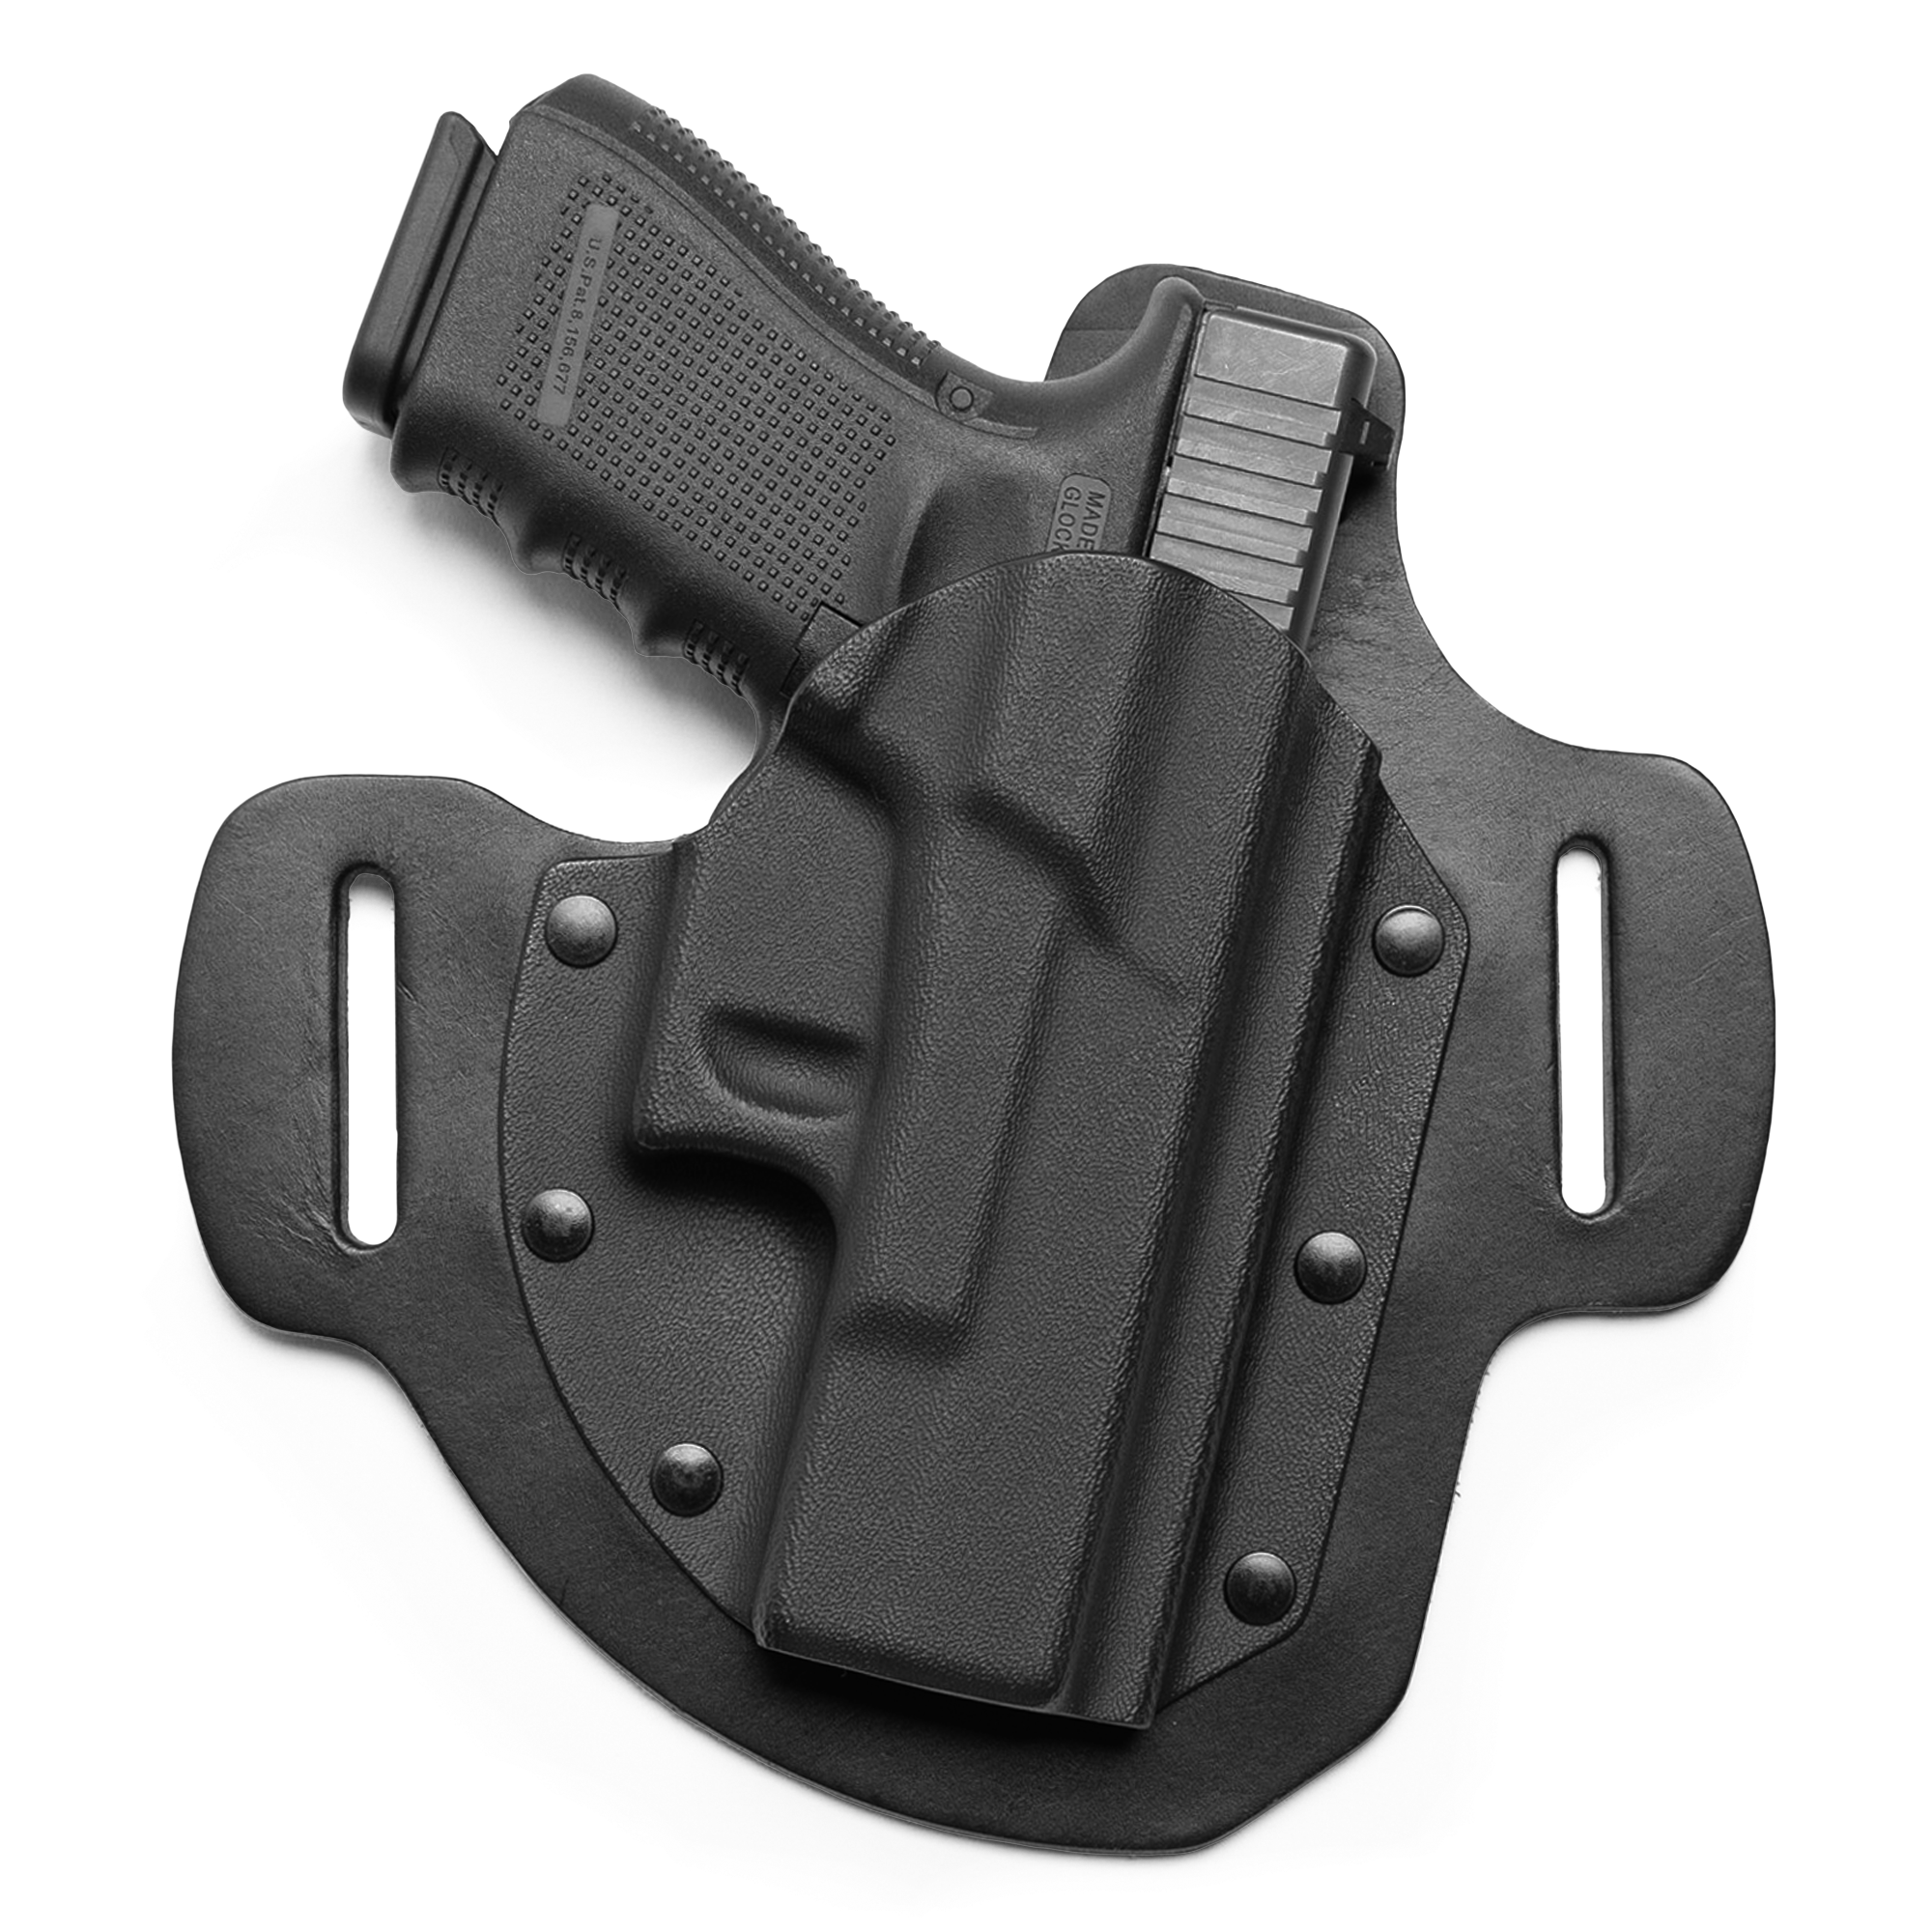 The Quick Draw Outside the Waistband Holster